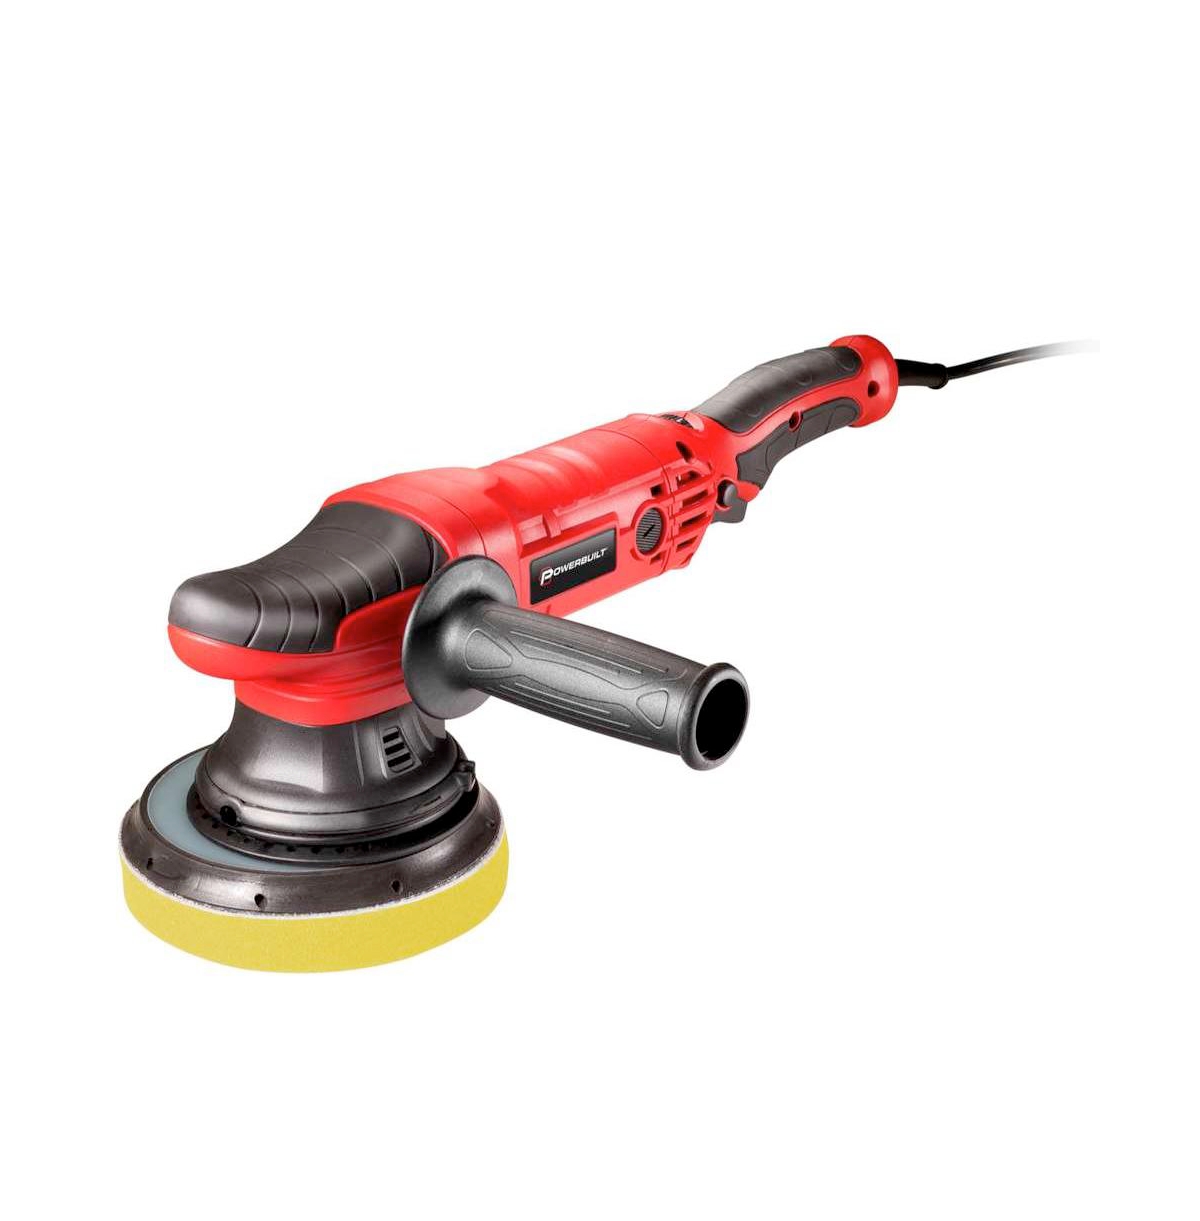 6 Inch Dual Action Orbital Long Throw Polisher with Speed Control - Red